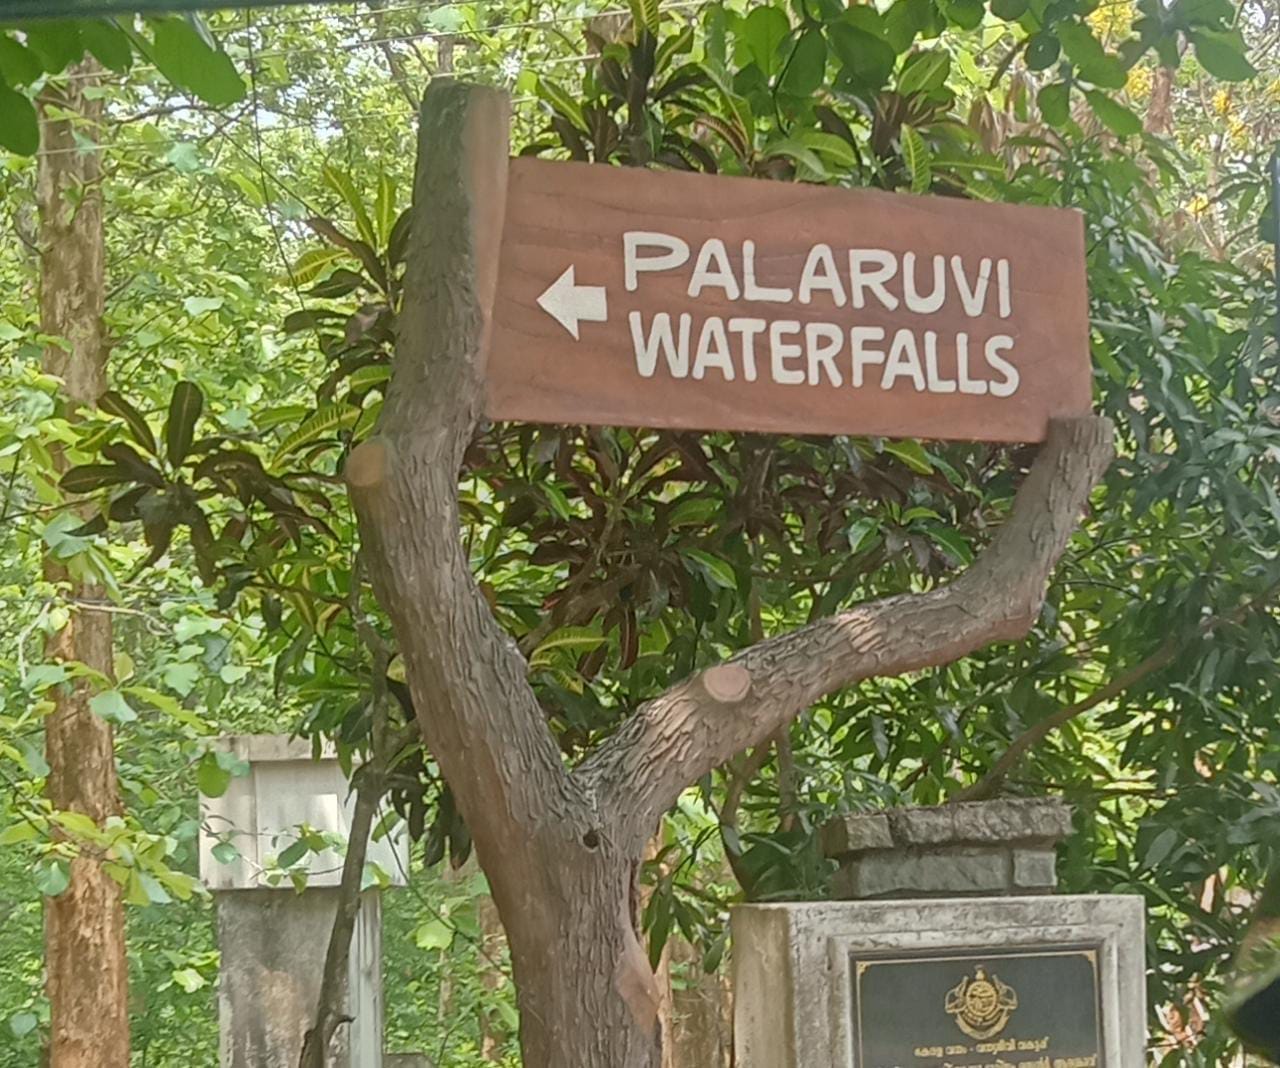  Palaruvi Falls is believed to have medicinal properties, and people come from far and wide to bathe in it